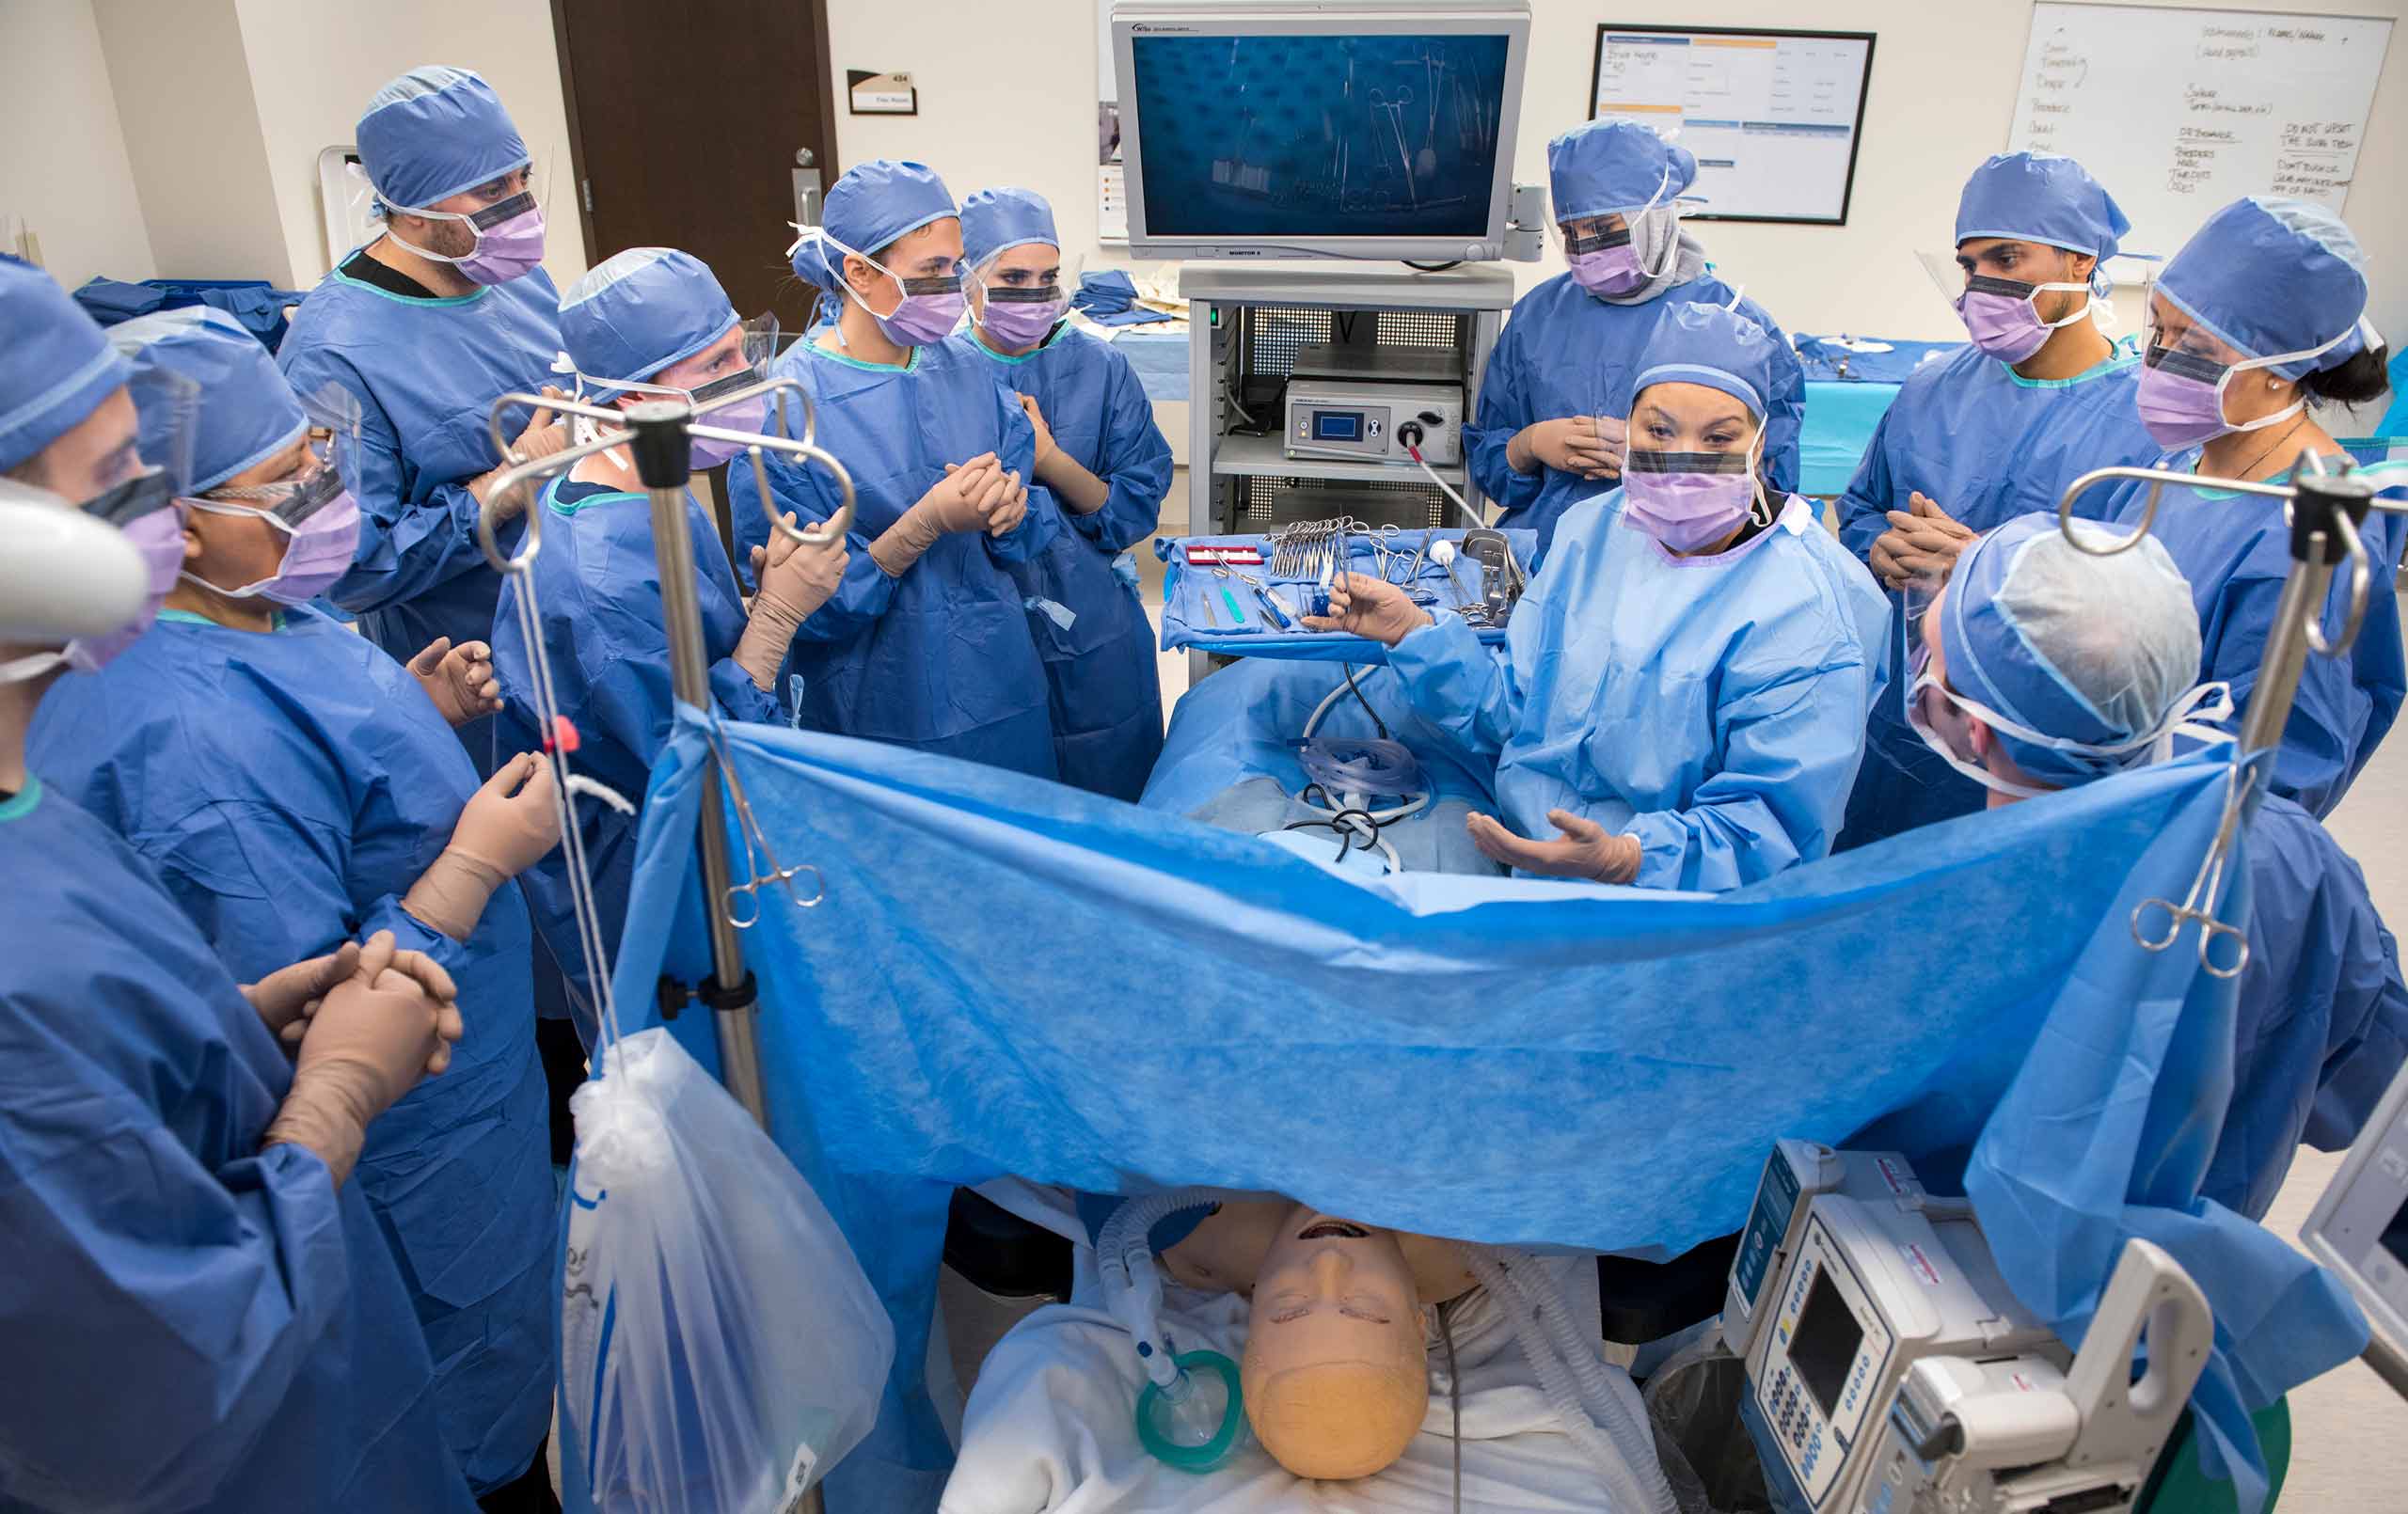 Students participate in mock surgery at Rosalind Franklin University Center for Advanced Simulation in Healthcare